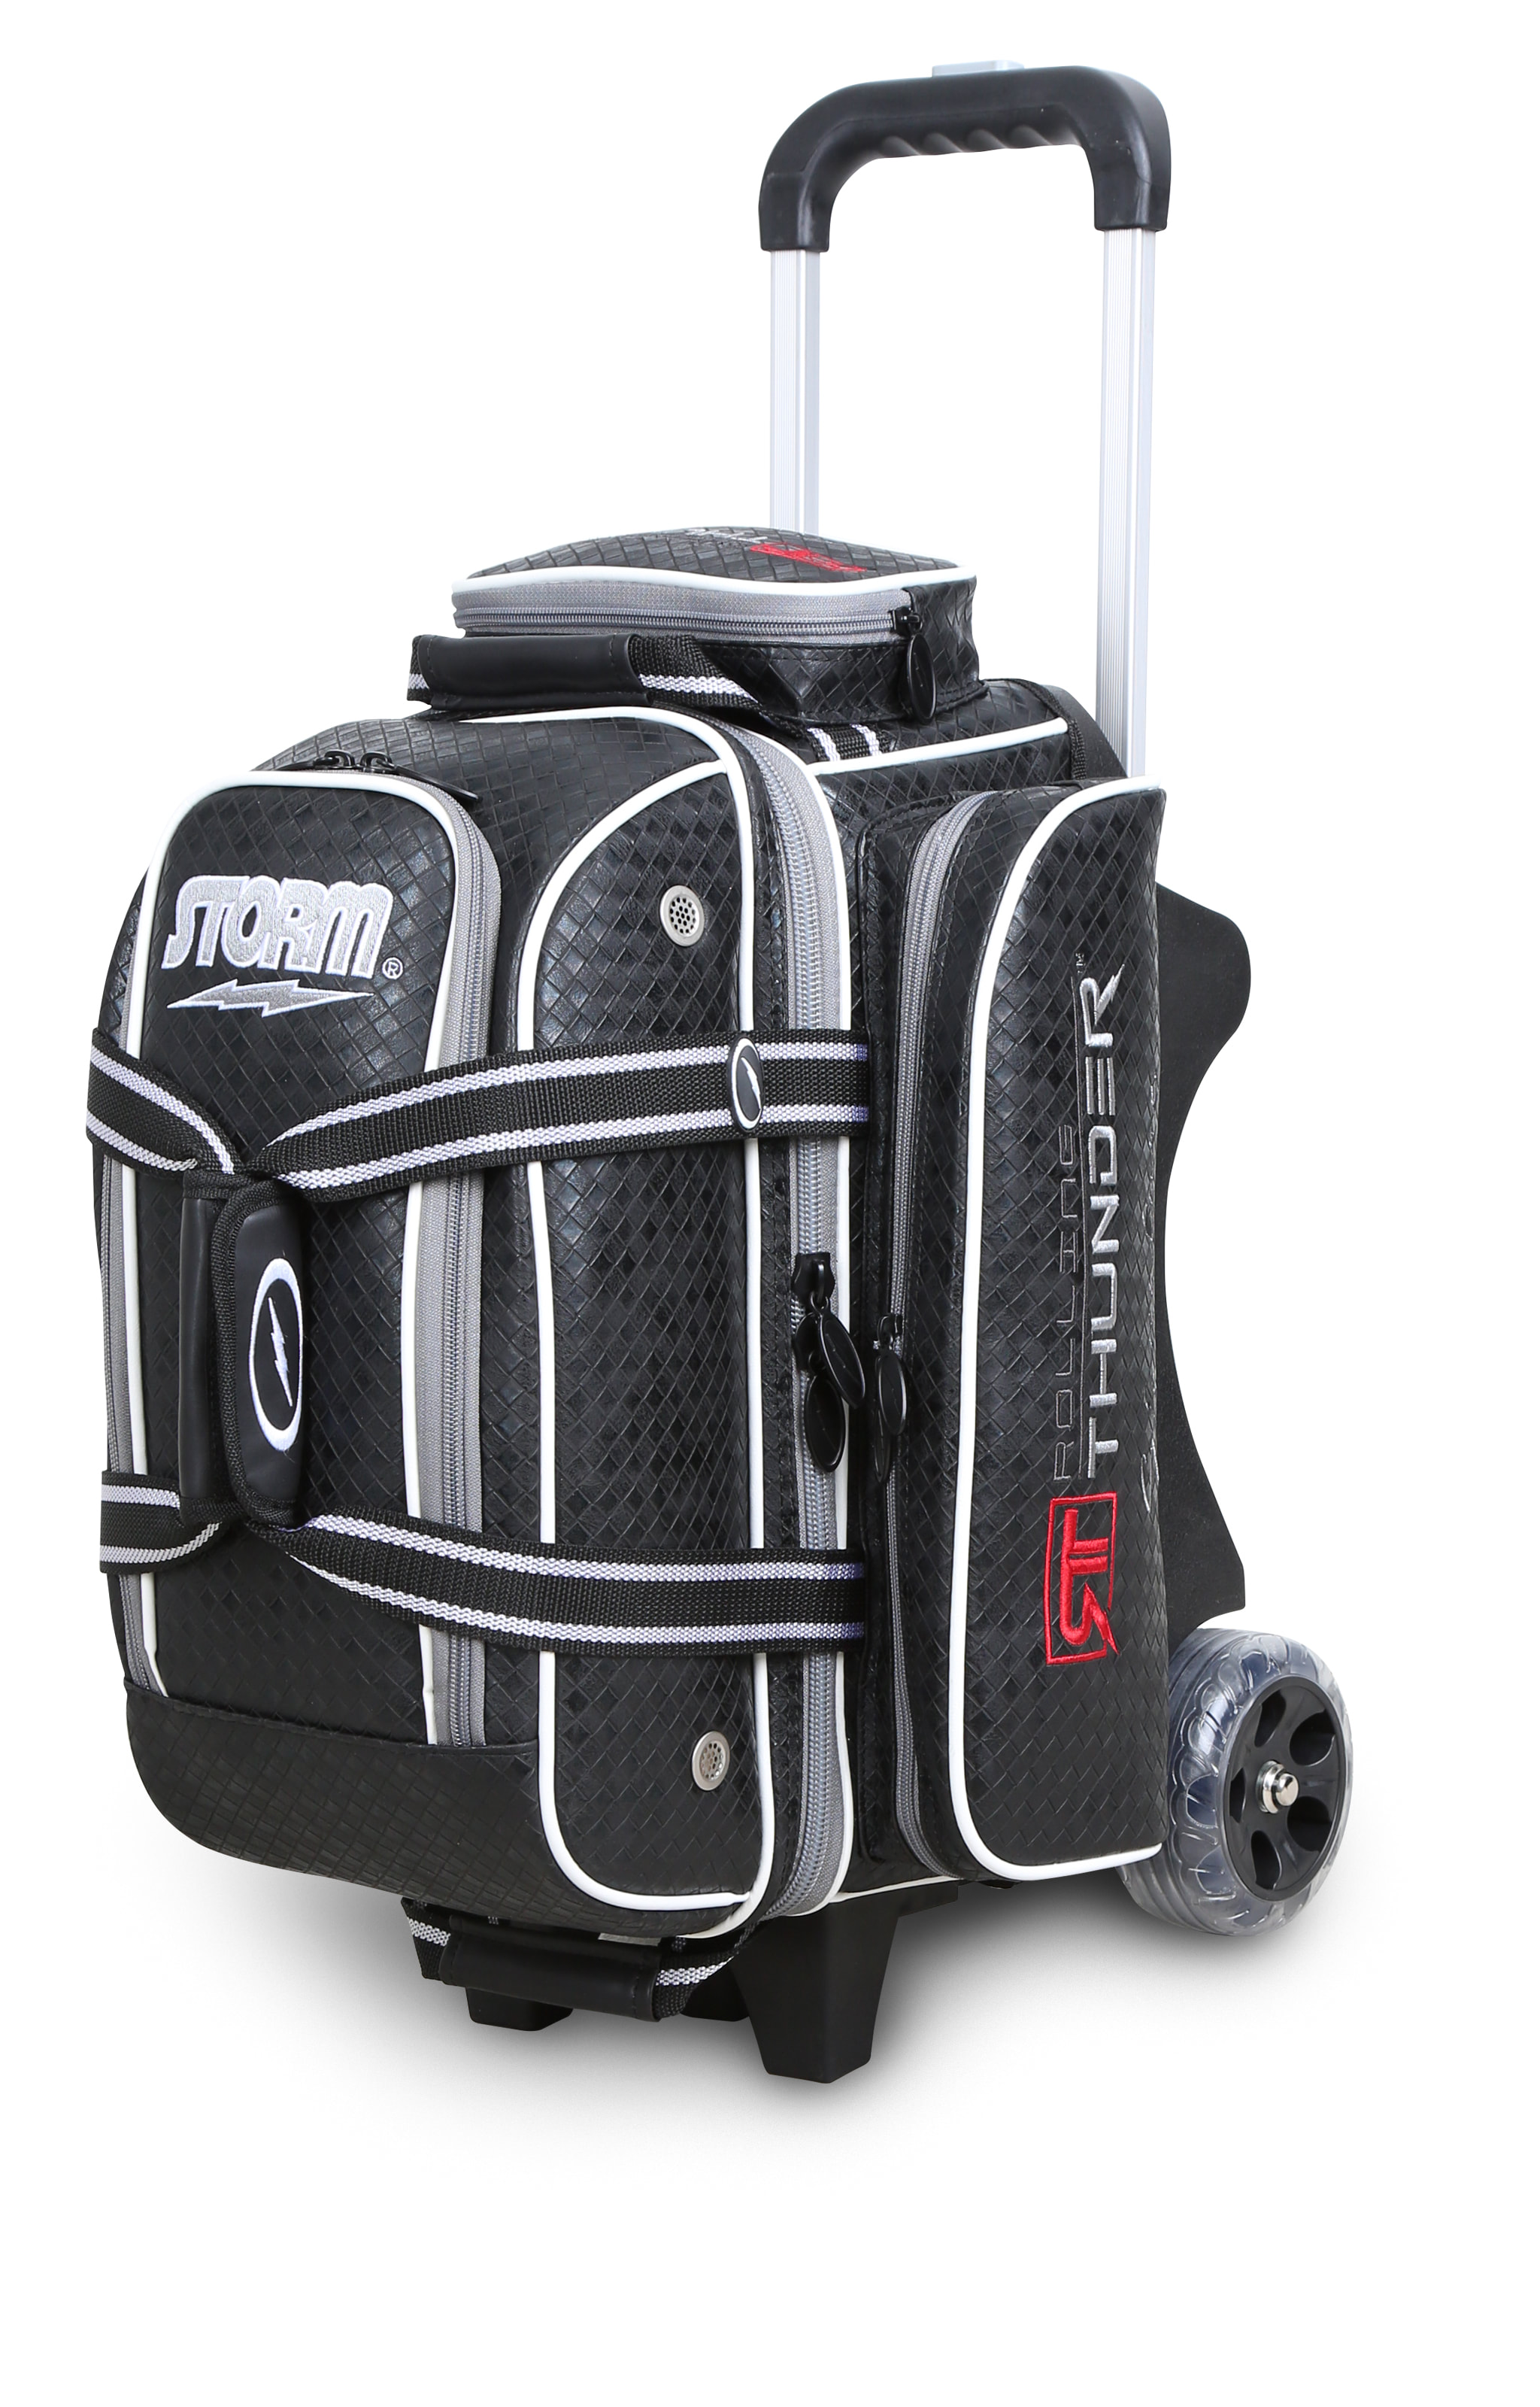 THE COMMANDO 2 BALL DOUBLE ROLLER BOWLING BAG in SILVER GRAY & BLACK ~  NEW 